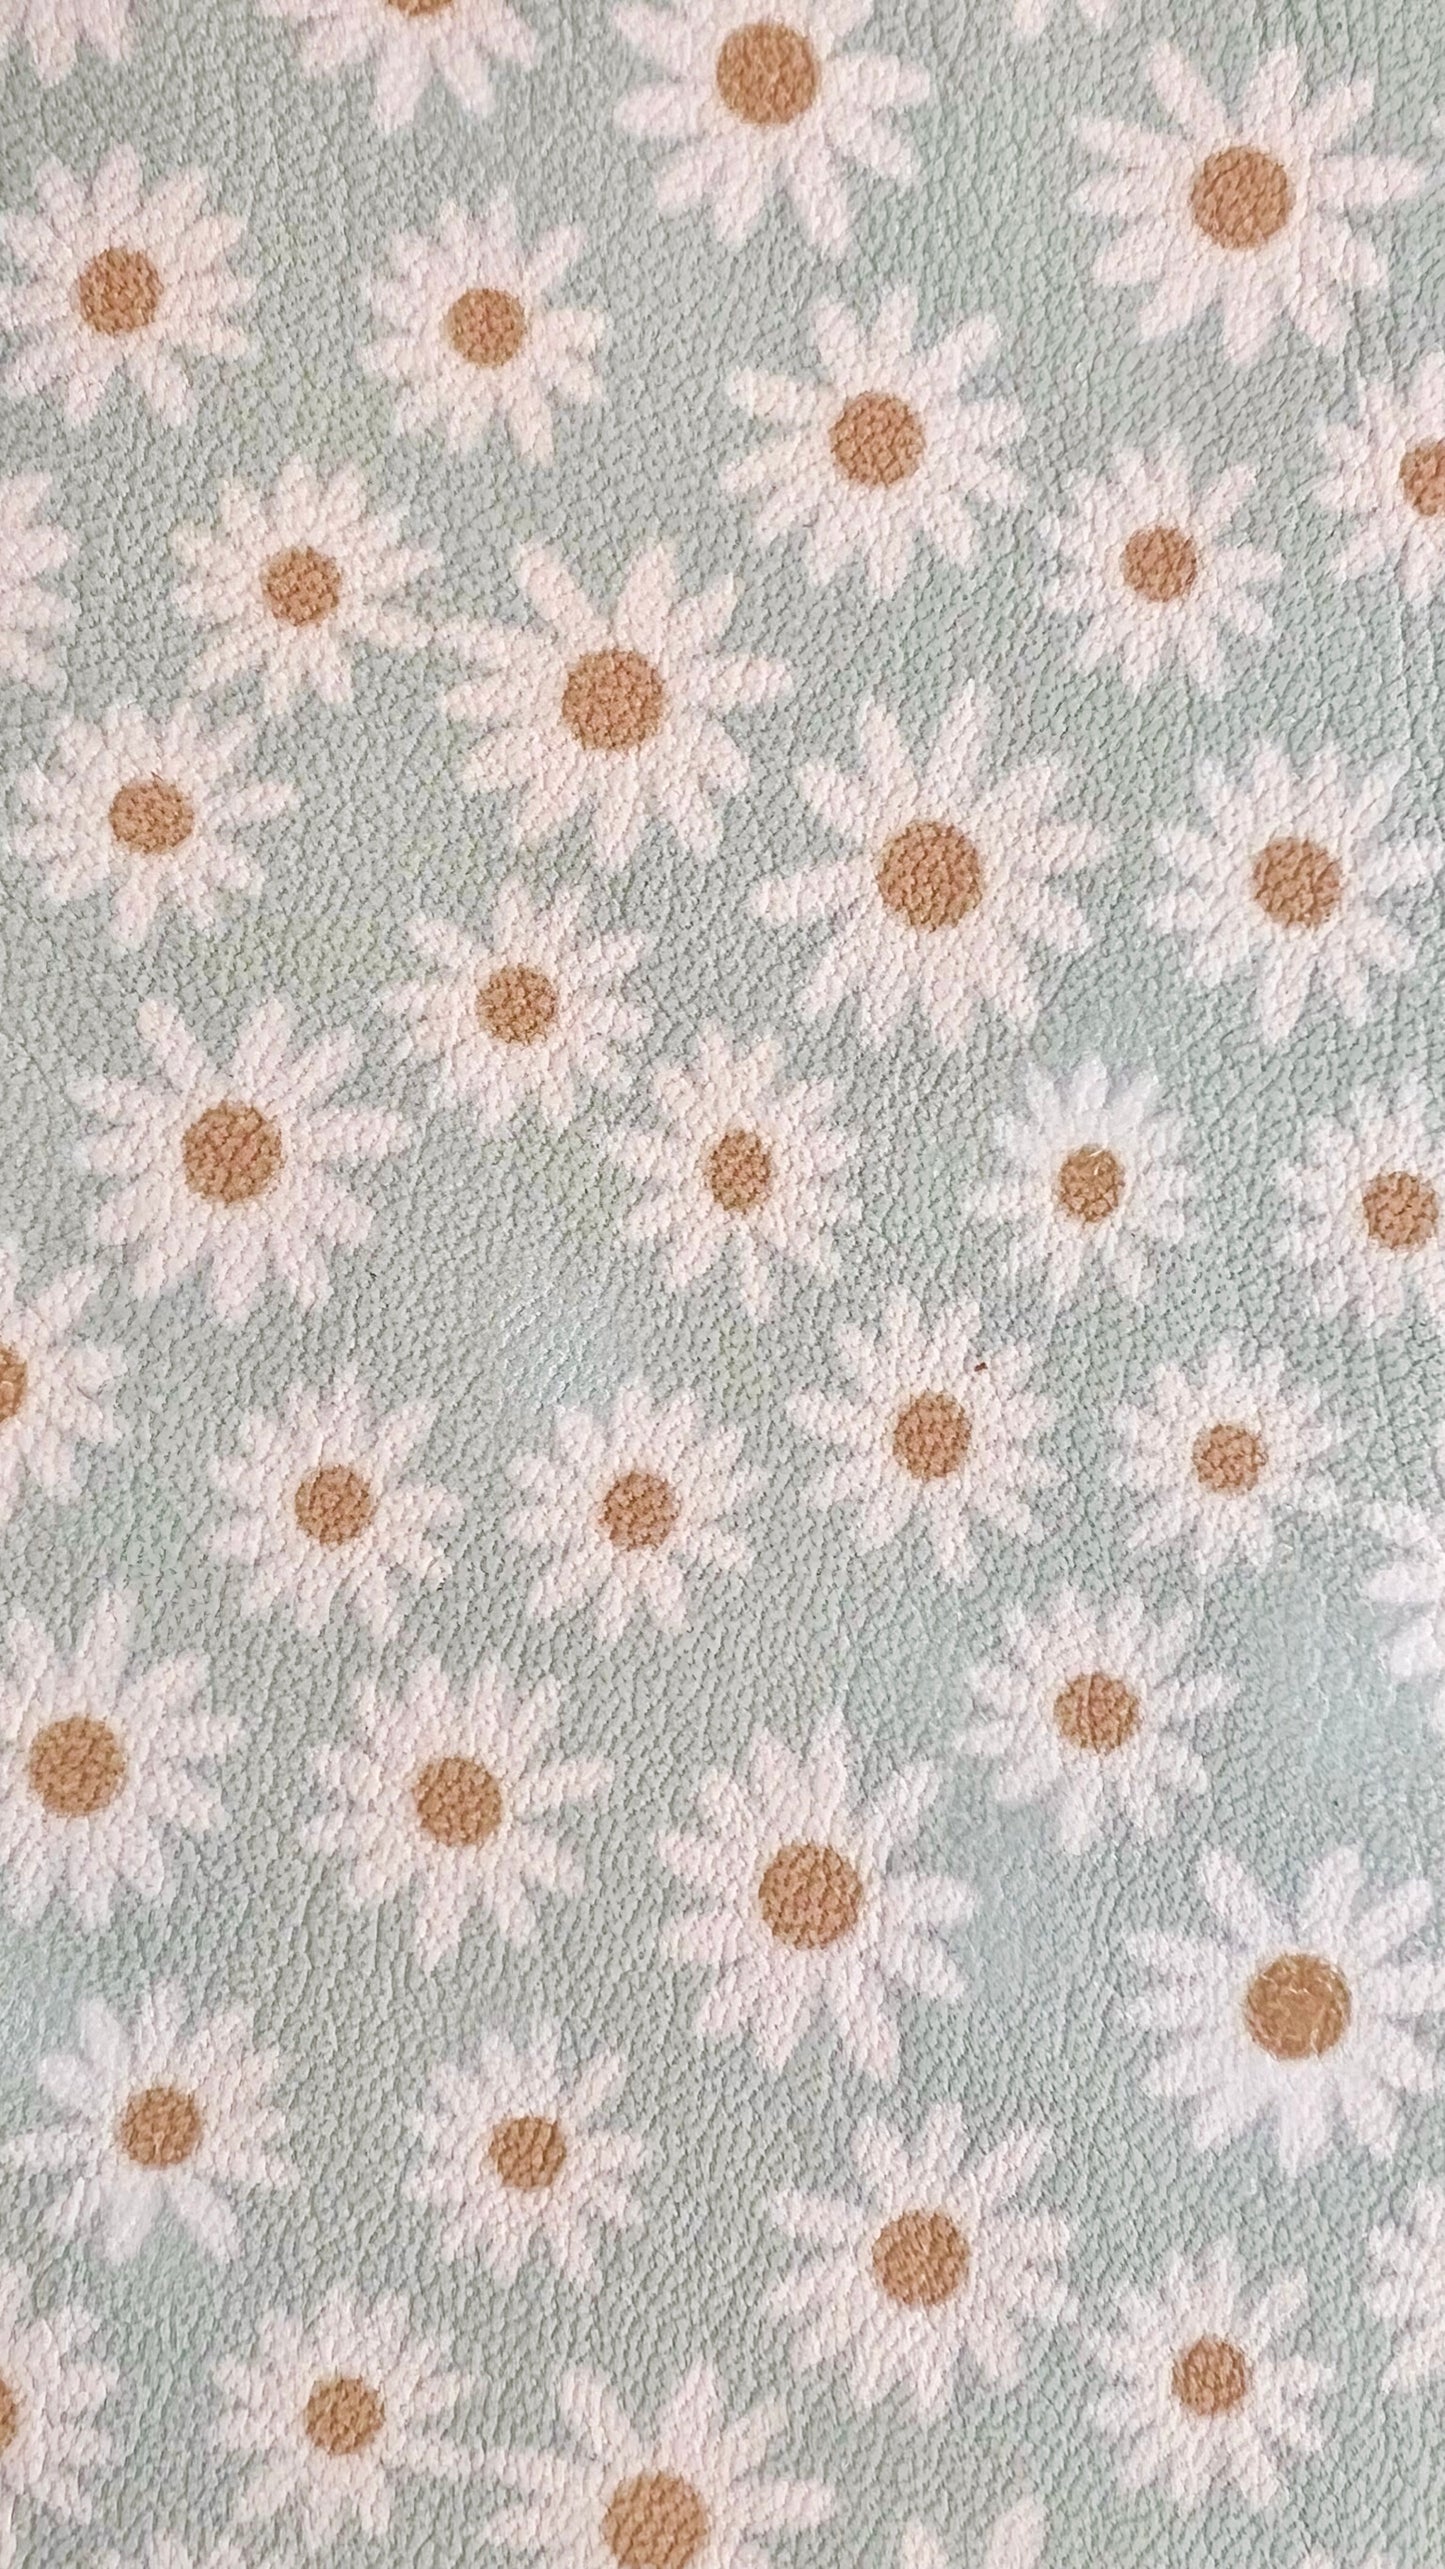 Lamb Leather Crafting Sheet in Boho Daisy 8 1/2" By 11"